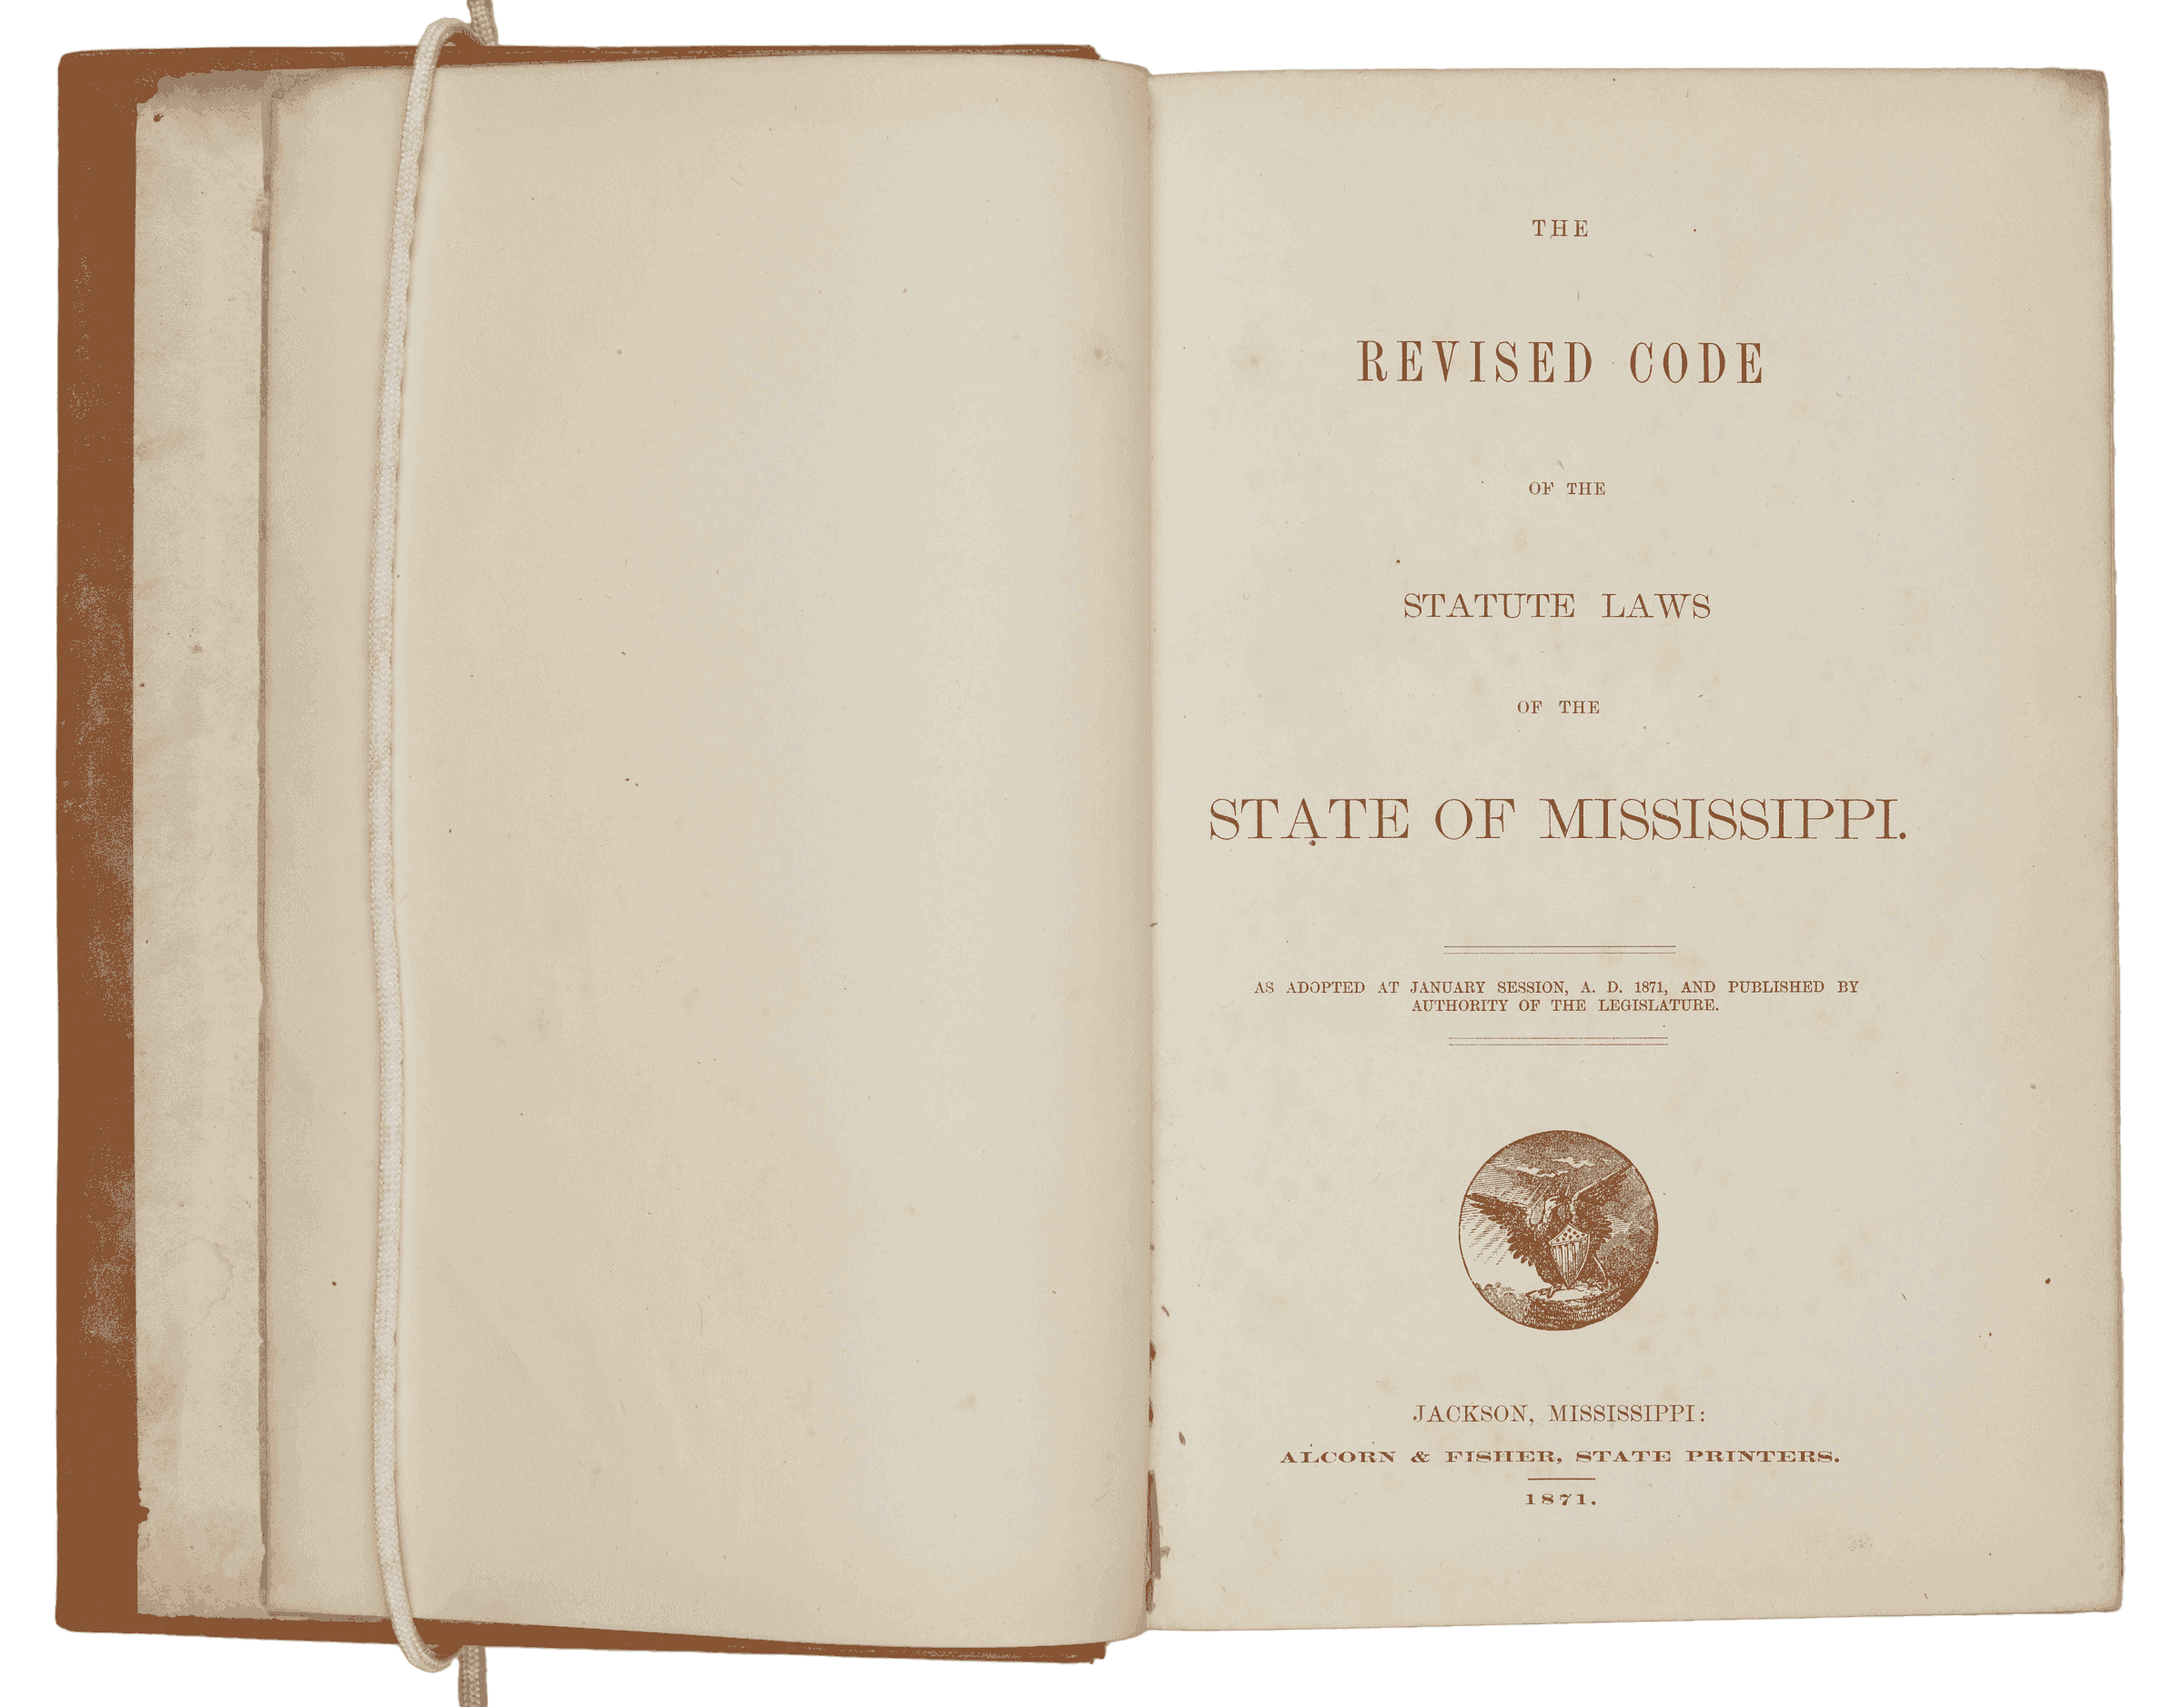 The Revised Code of Mississippi is opened to its title page. With the title, it has a small emblem.